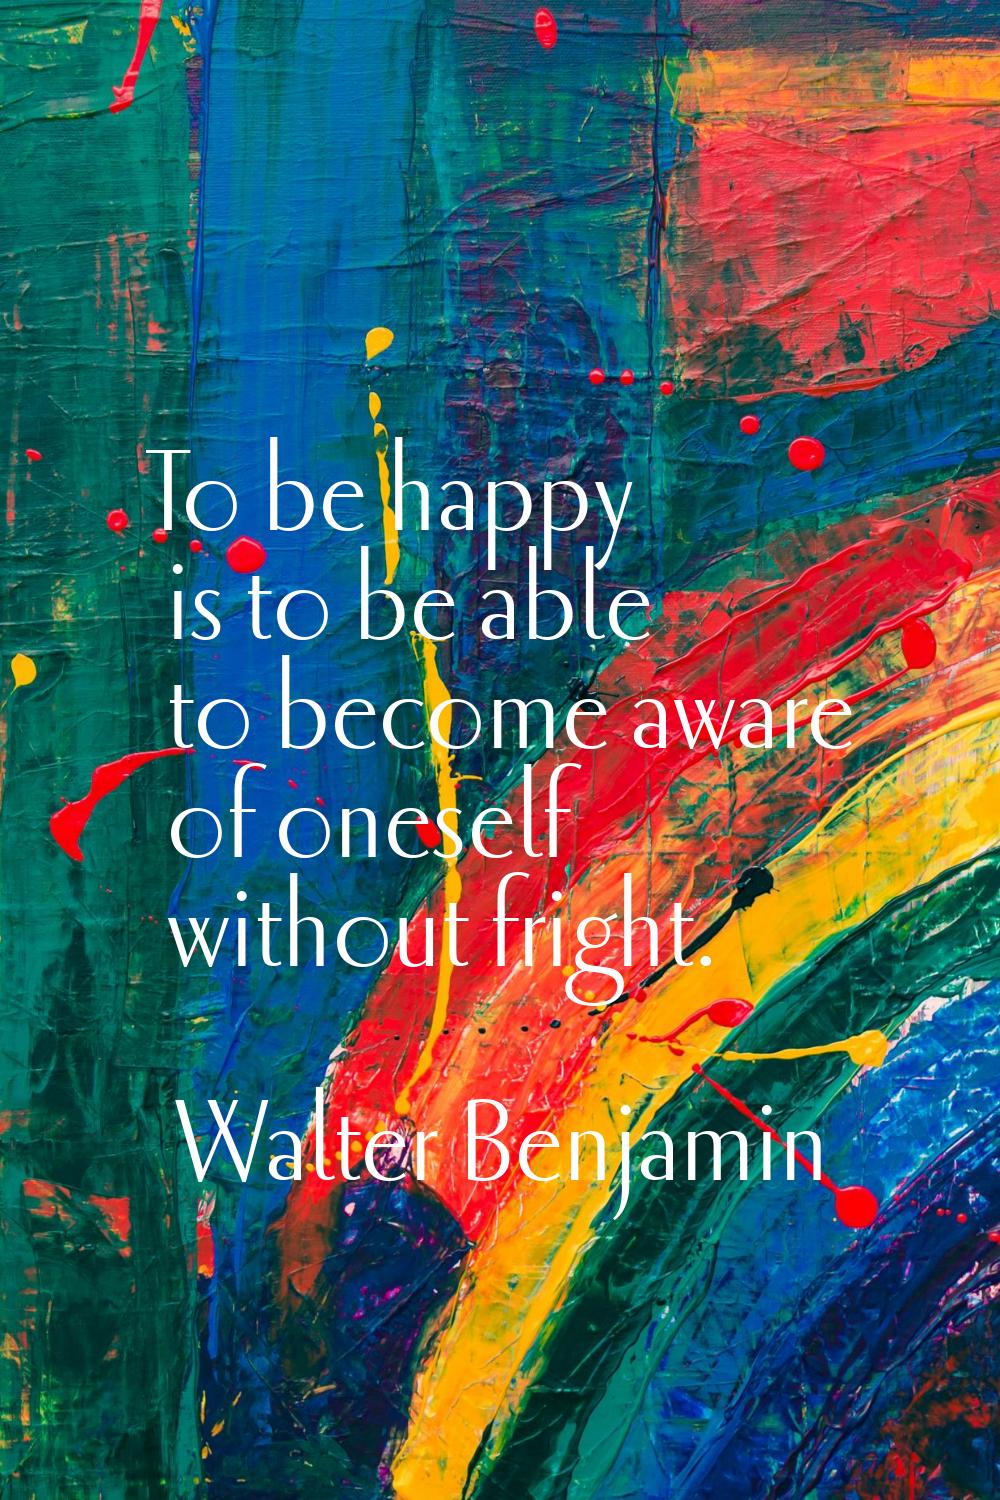 To be happy is to be able to become aware of oneself without fright.